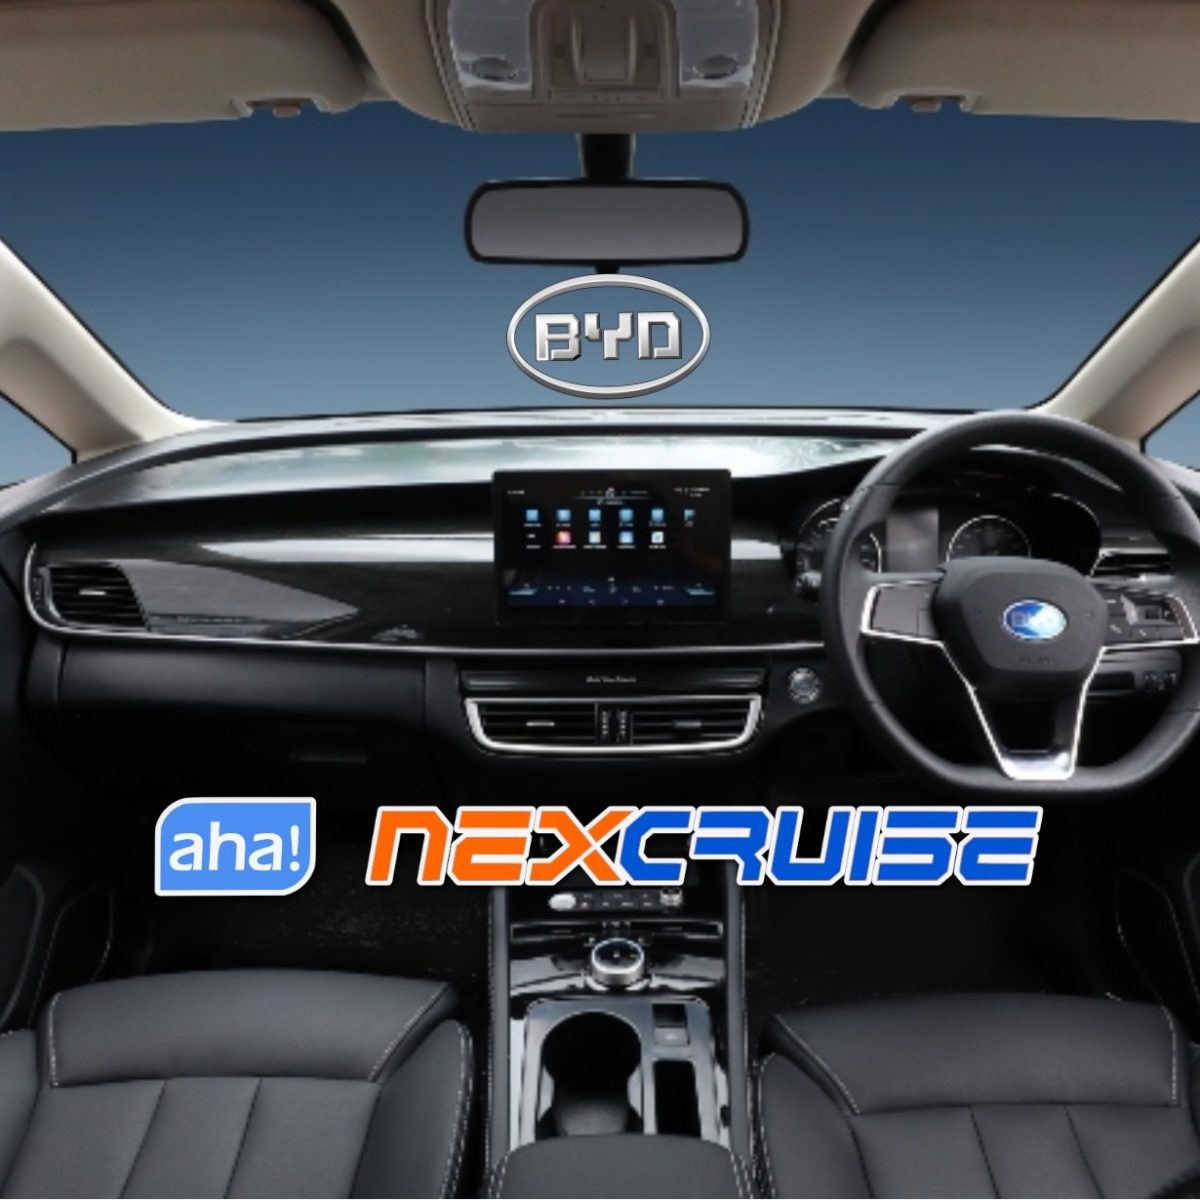 Aha NexCruise for BYD-E6